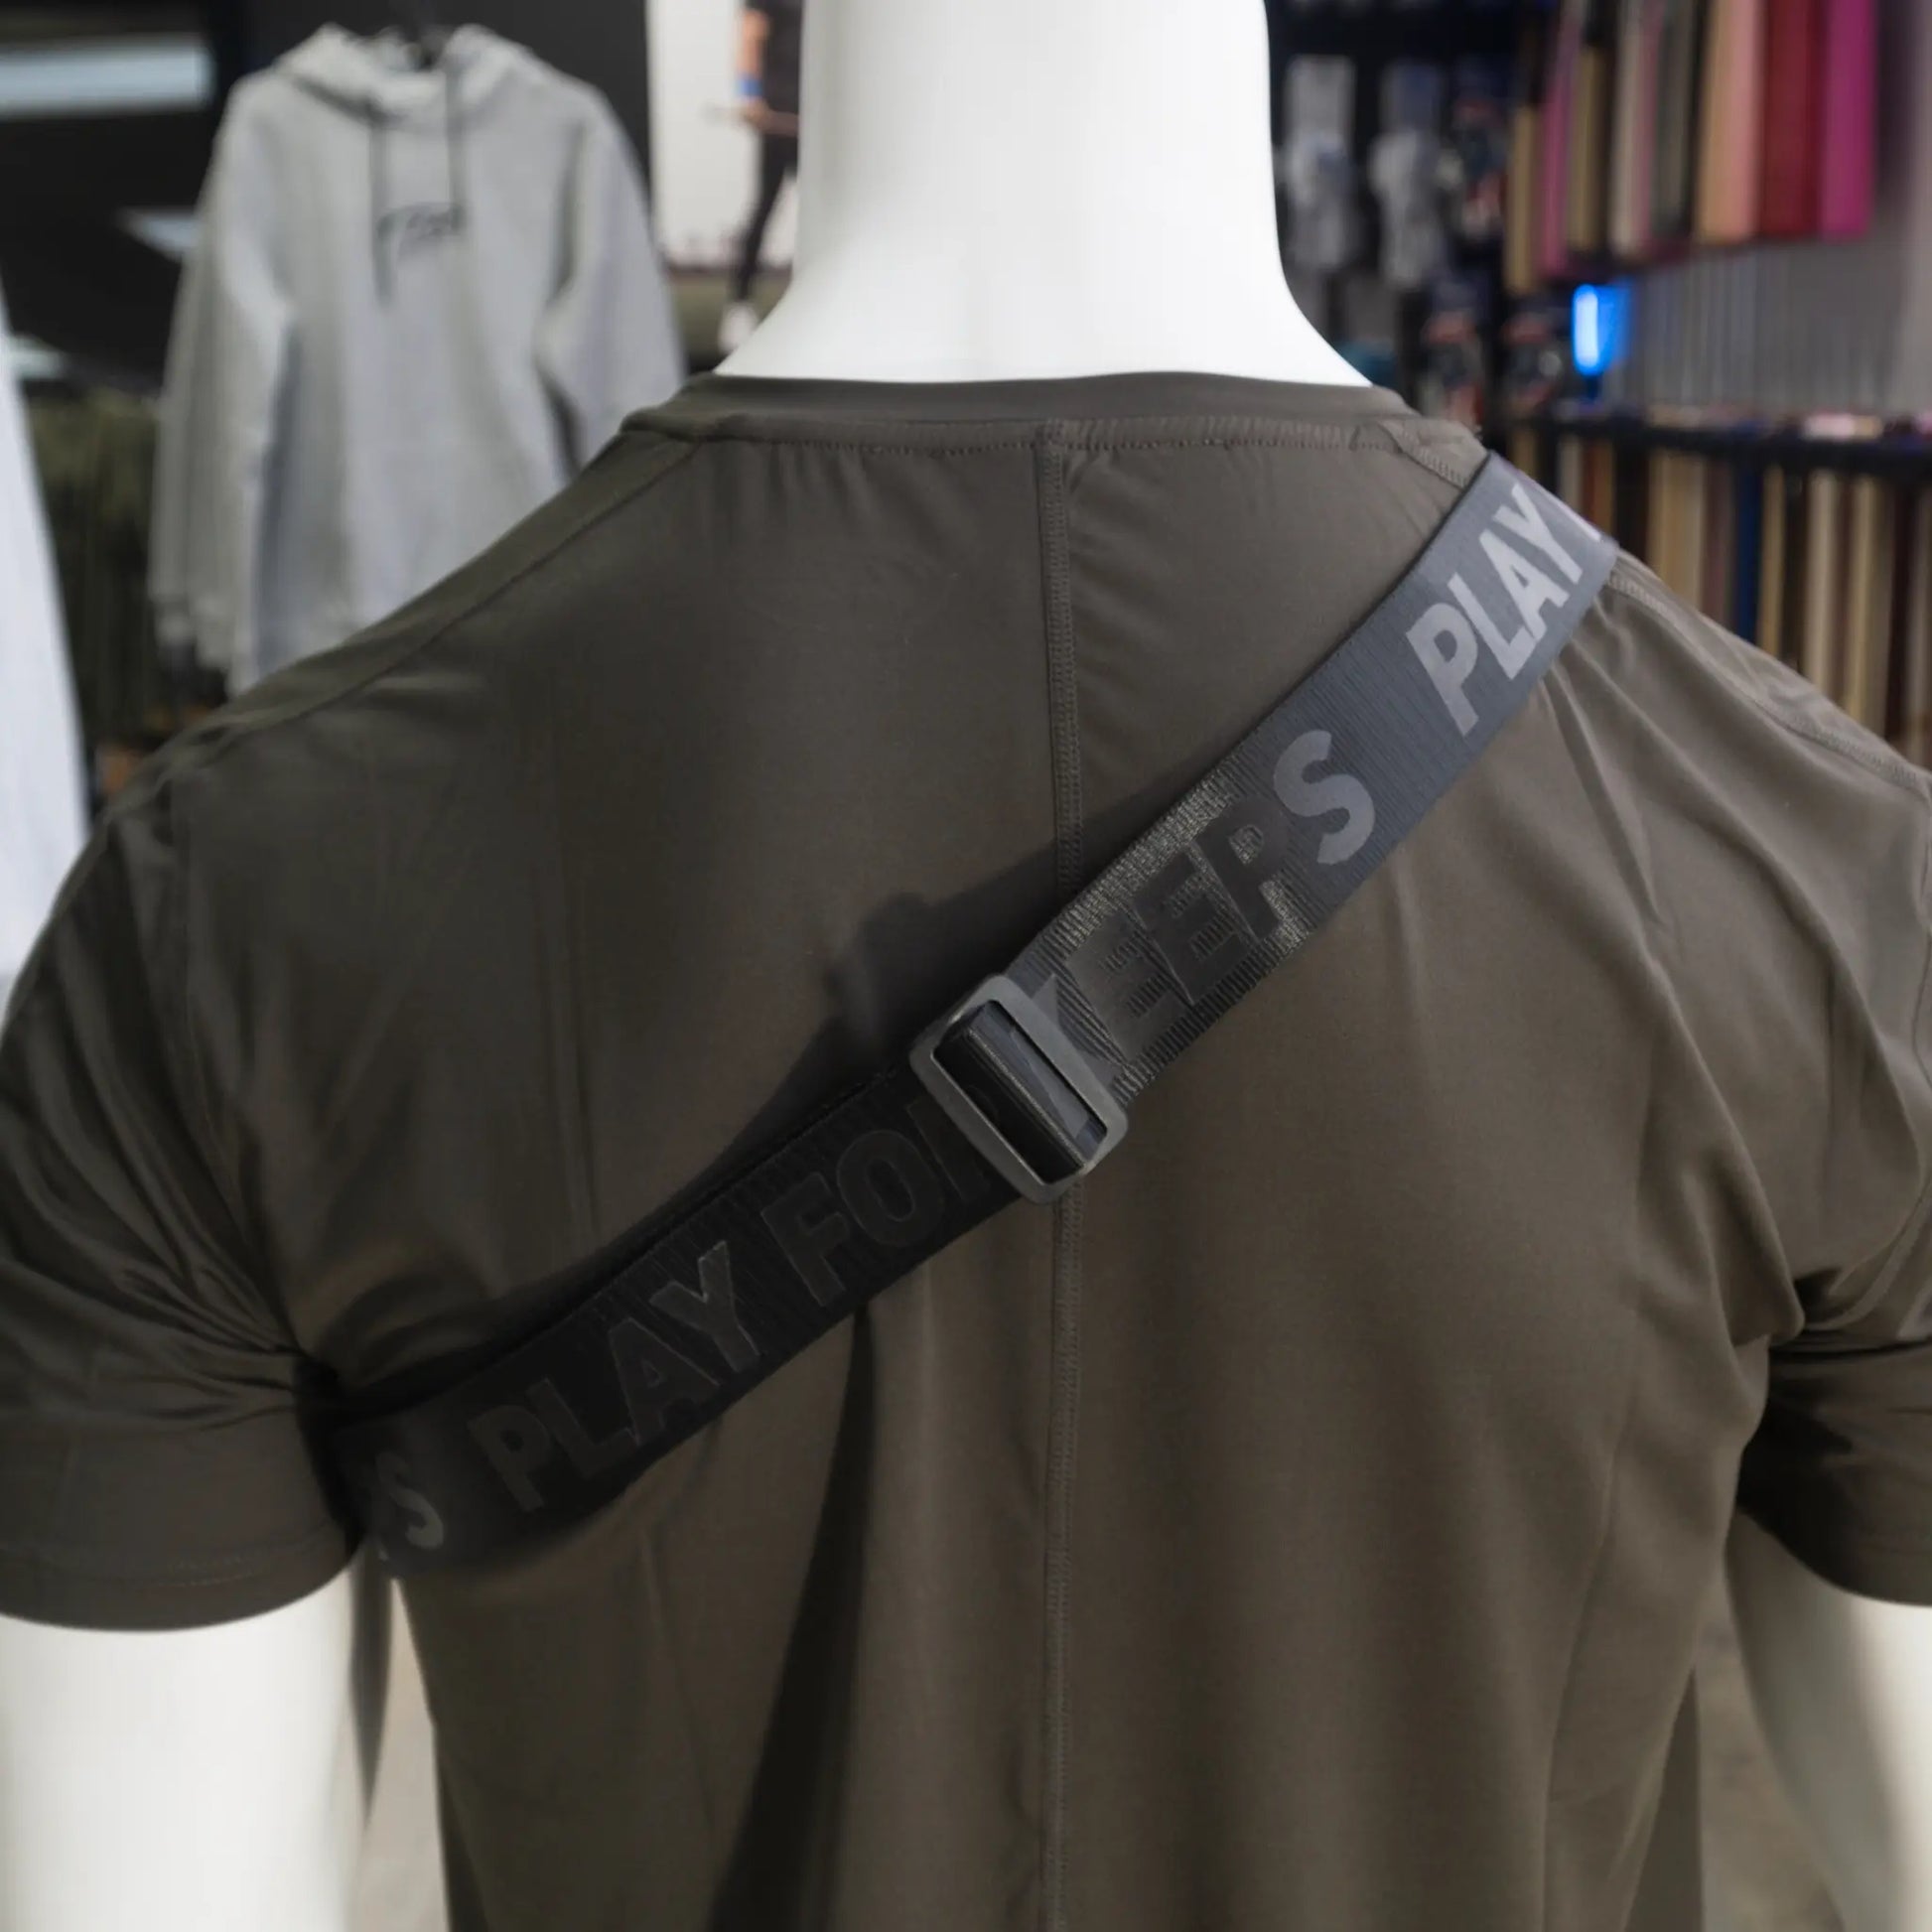 The photo shows a close-up of a strap with the words "PLAY FOR KEEPS" on a mannequin wearing a sporty shirt, showcasing the functional style of a Tater Baseball crossbody bag.